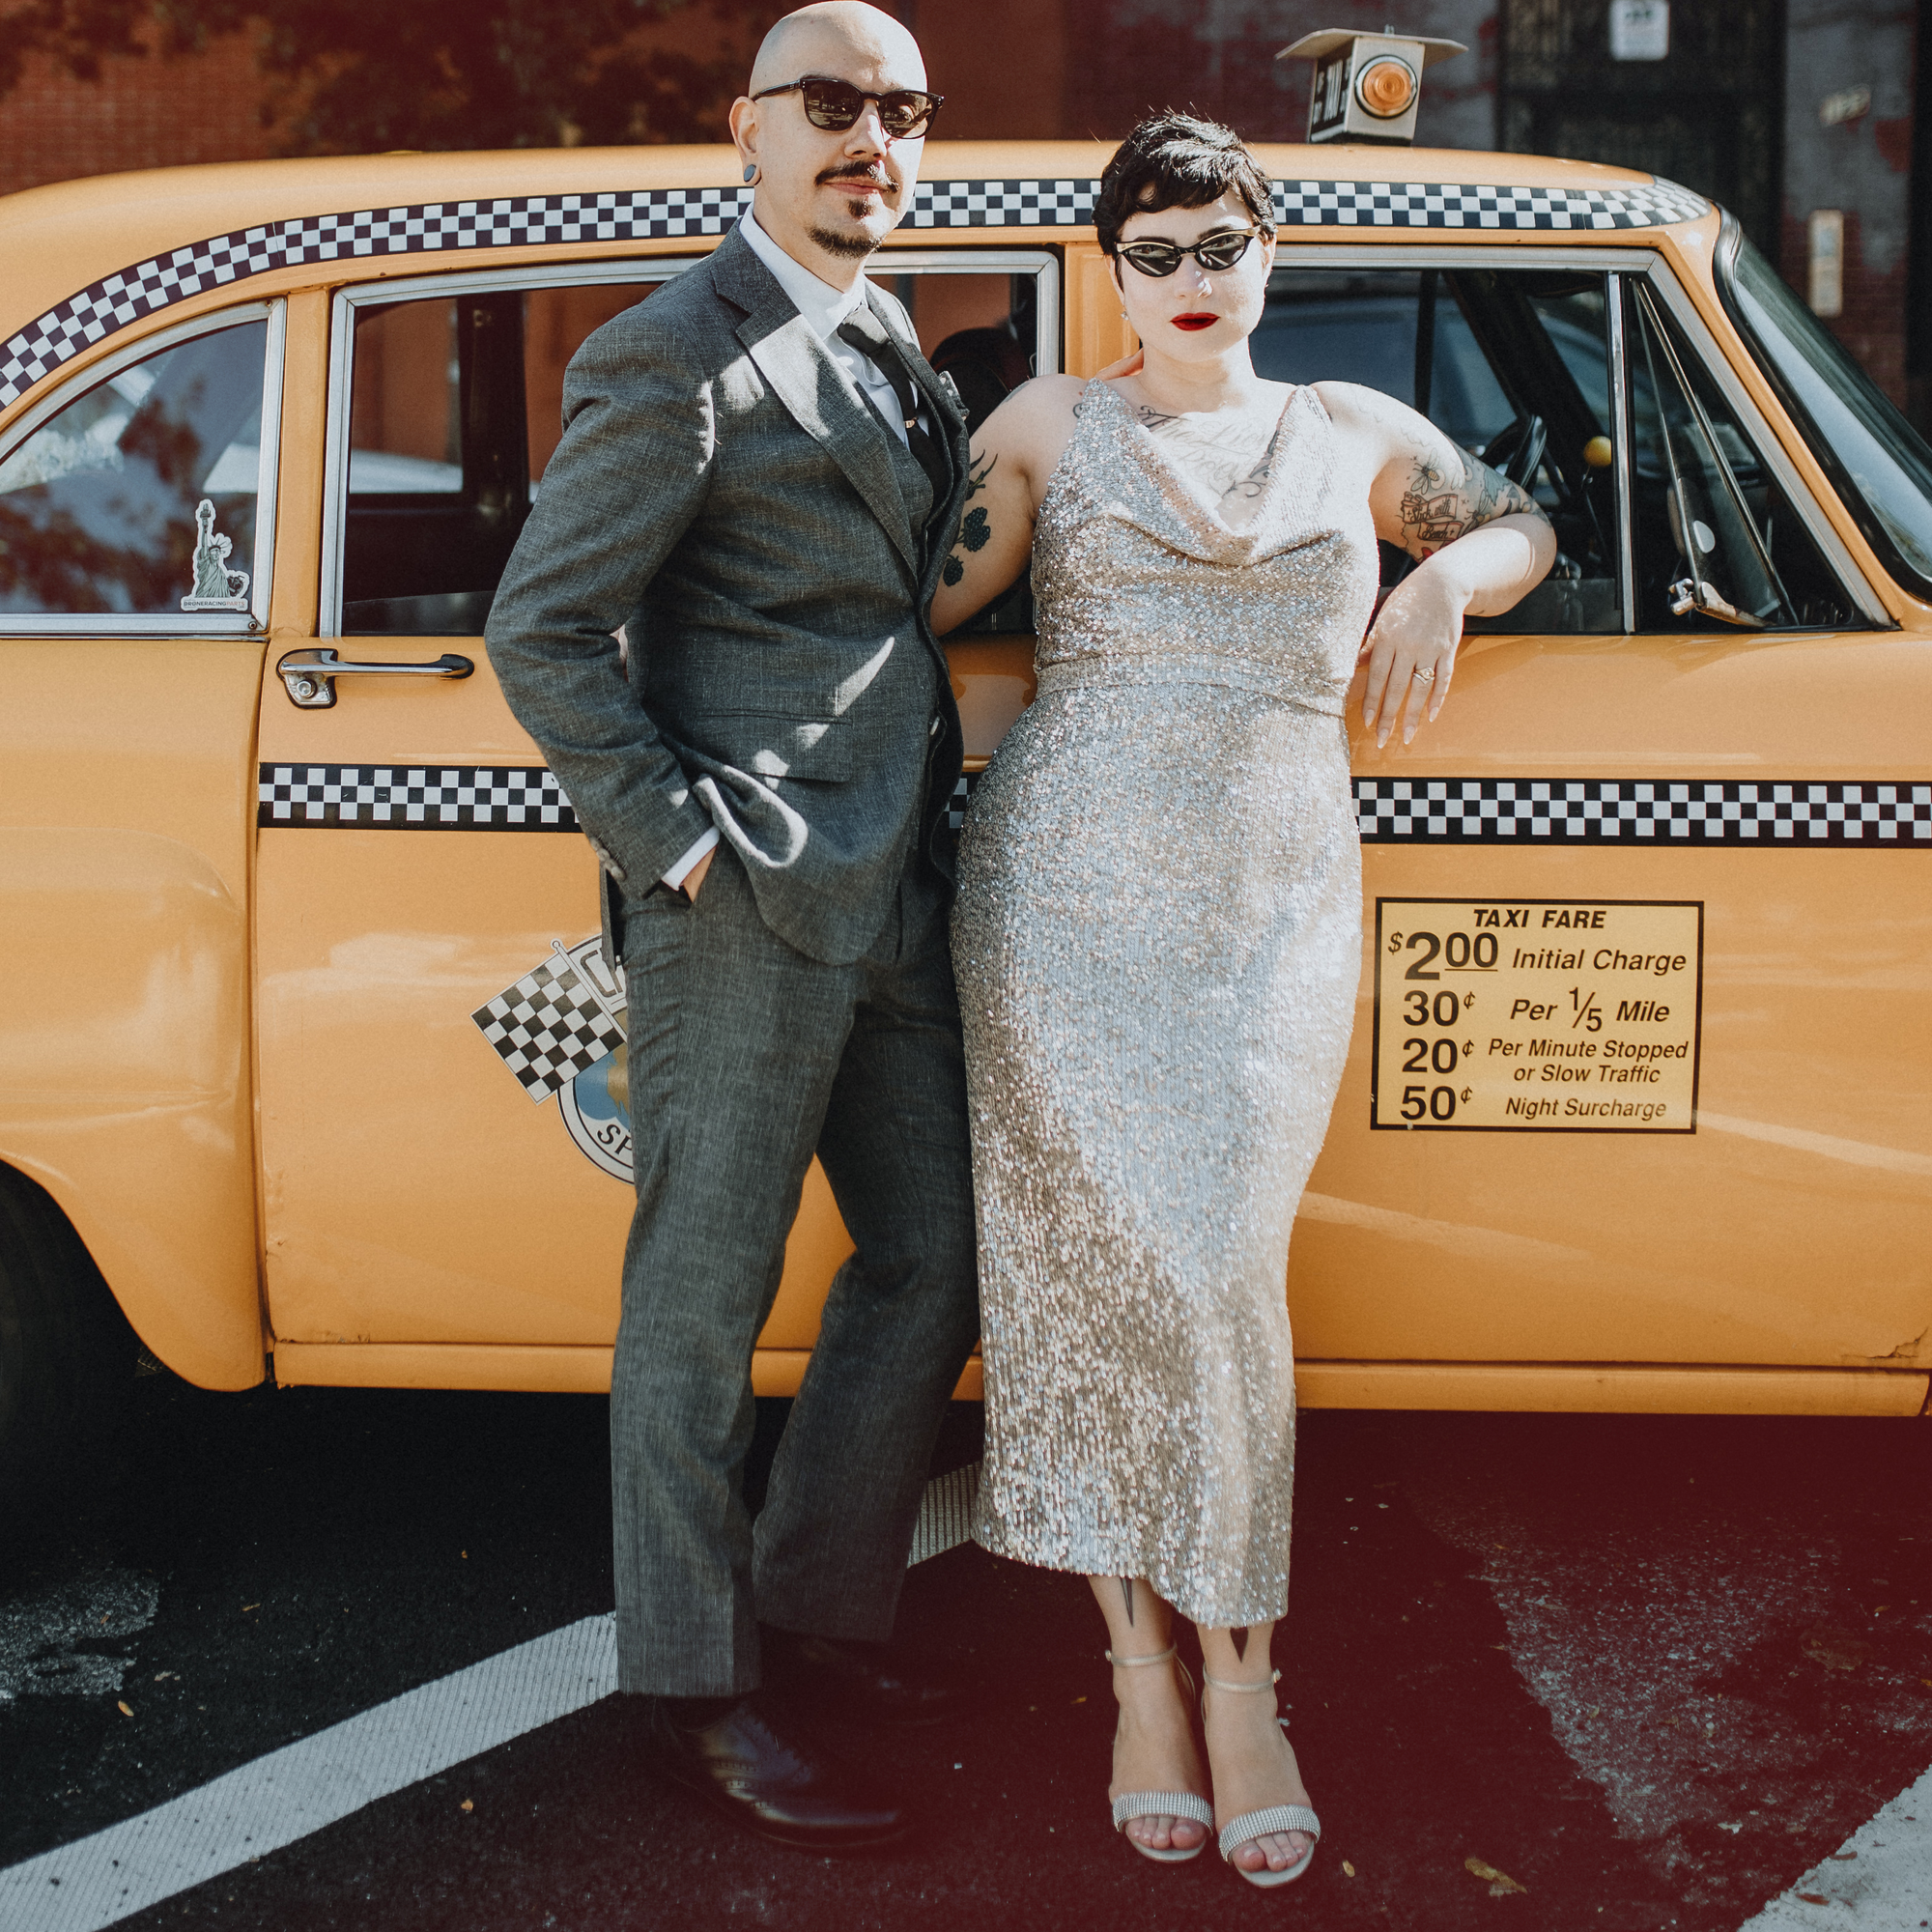 Aly and Daniel posed in front of a vintage taxi cab on their wedding day.